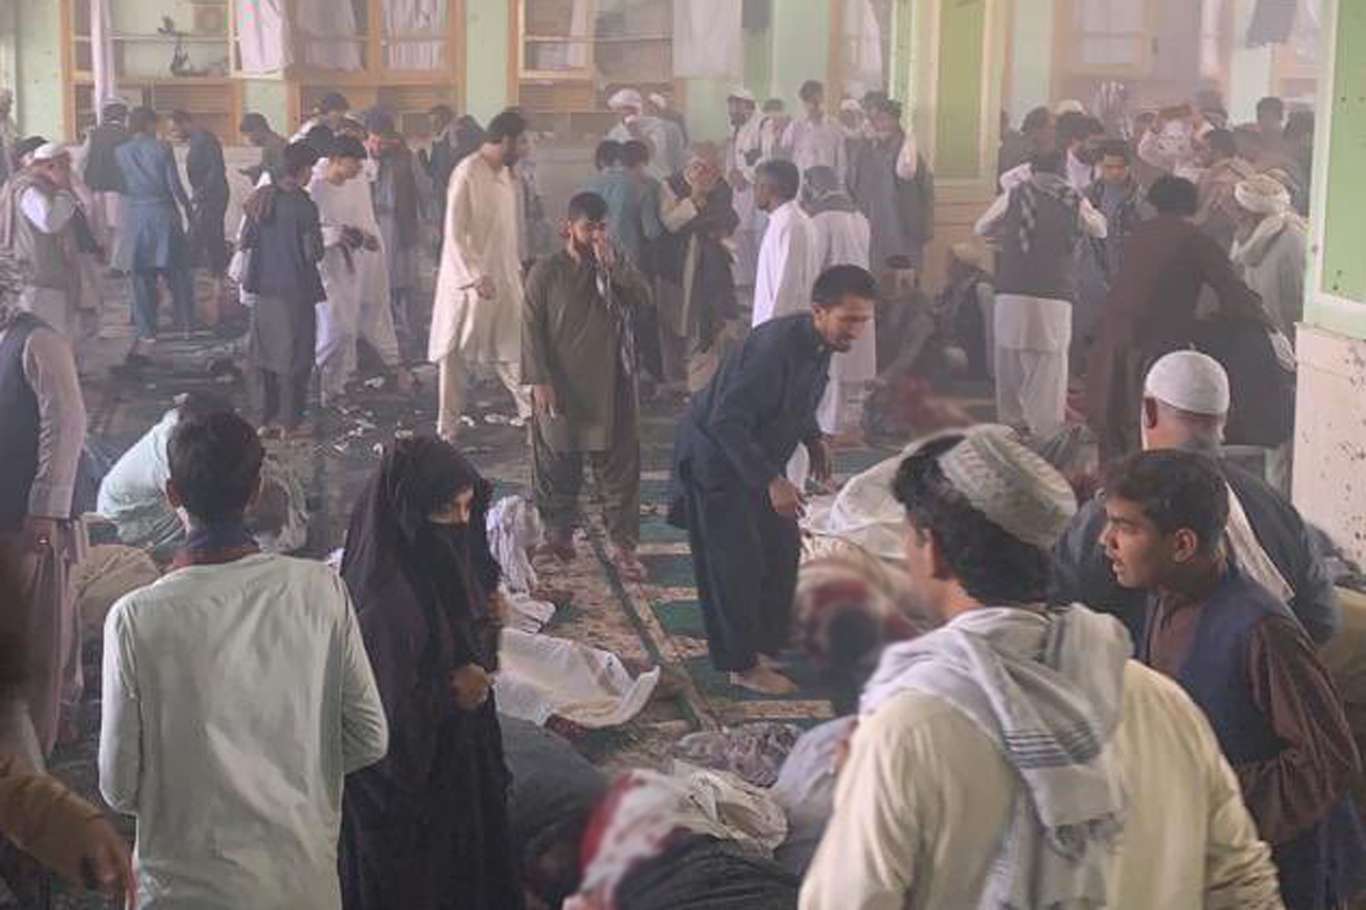 HÜDA PAR offers condolences to Afghan people for mosque attack victims